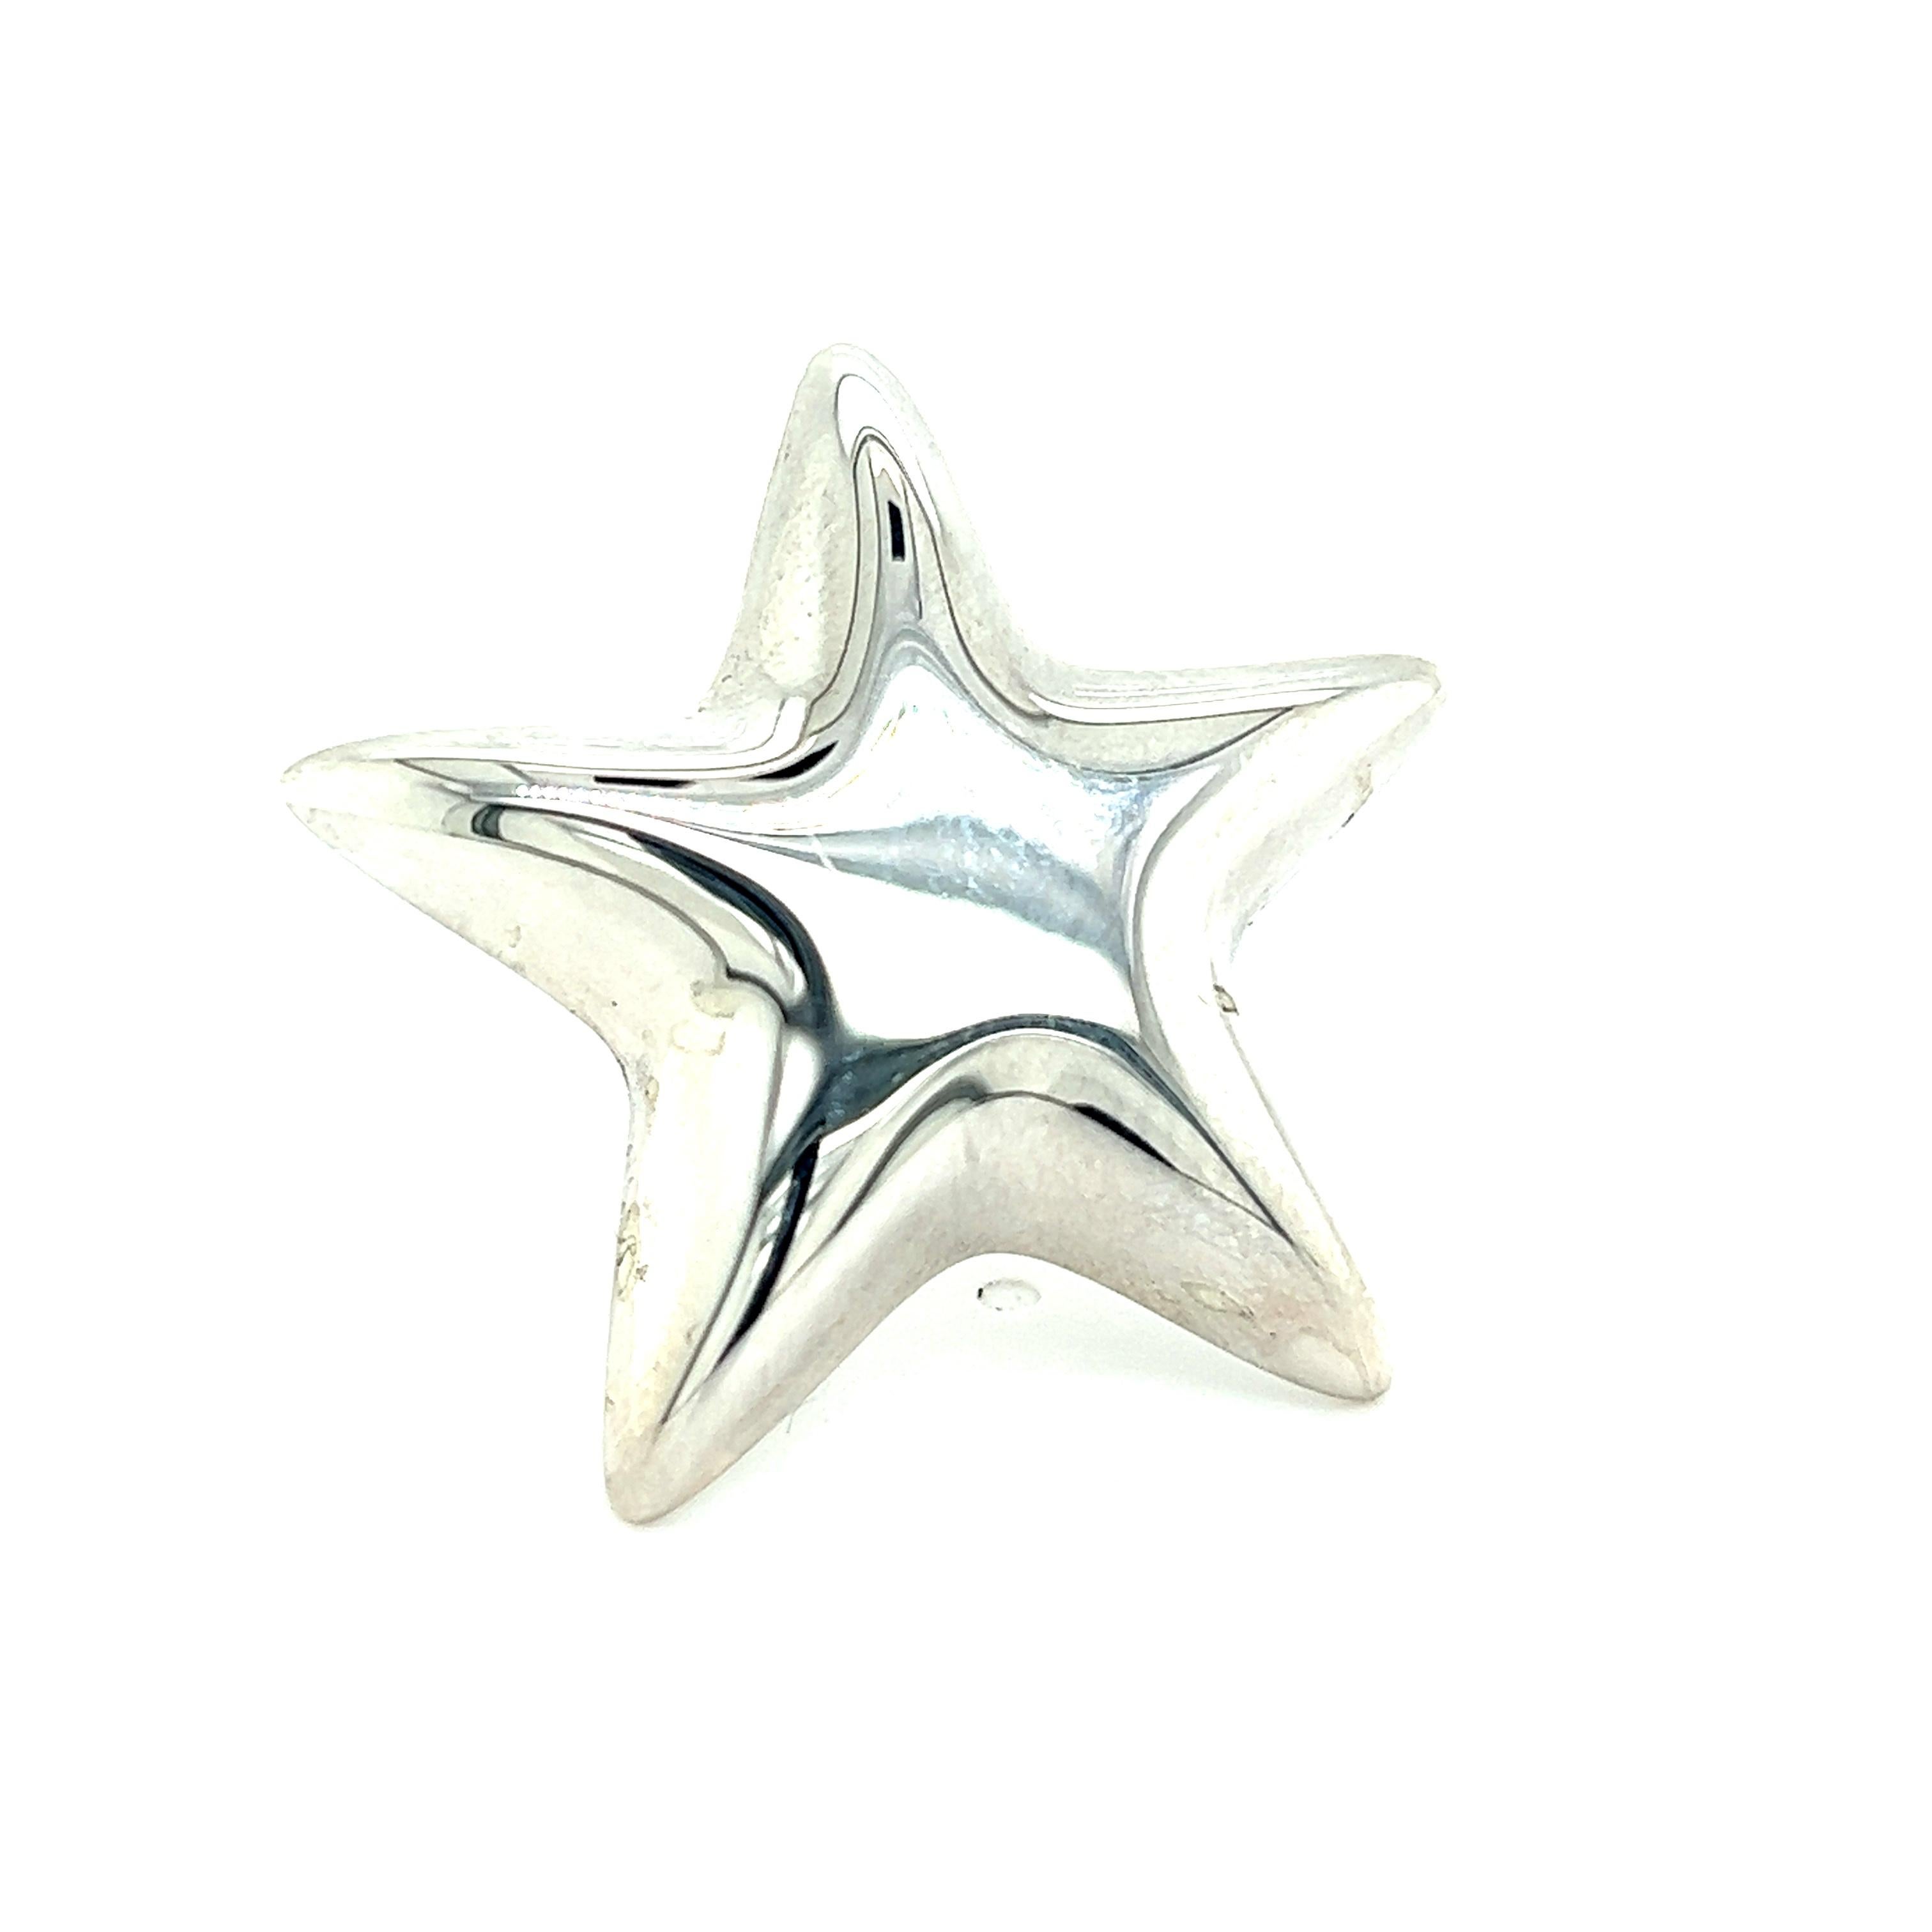 Authentic Tiffany & Co Estate Puffed Star Brooch Sterling Silver TIF637

TRUSTED SELLER SINCE 2002

PLEASE SEE OUR HUNDREDS OF POSITIVE FEEDBACKS FROM OUR CLIENTS!!

FREE SHIPPING
Grams: 10.2
Shape: Puffed Star 
Material: Sterling Silver


